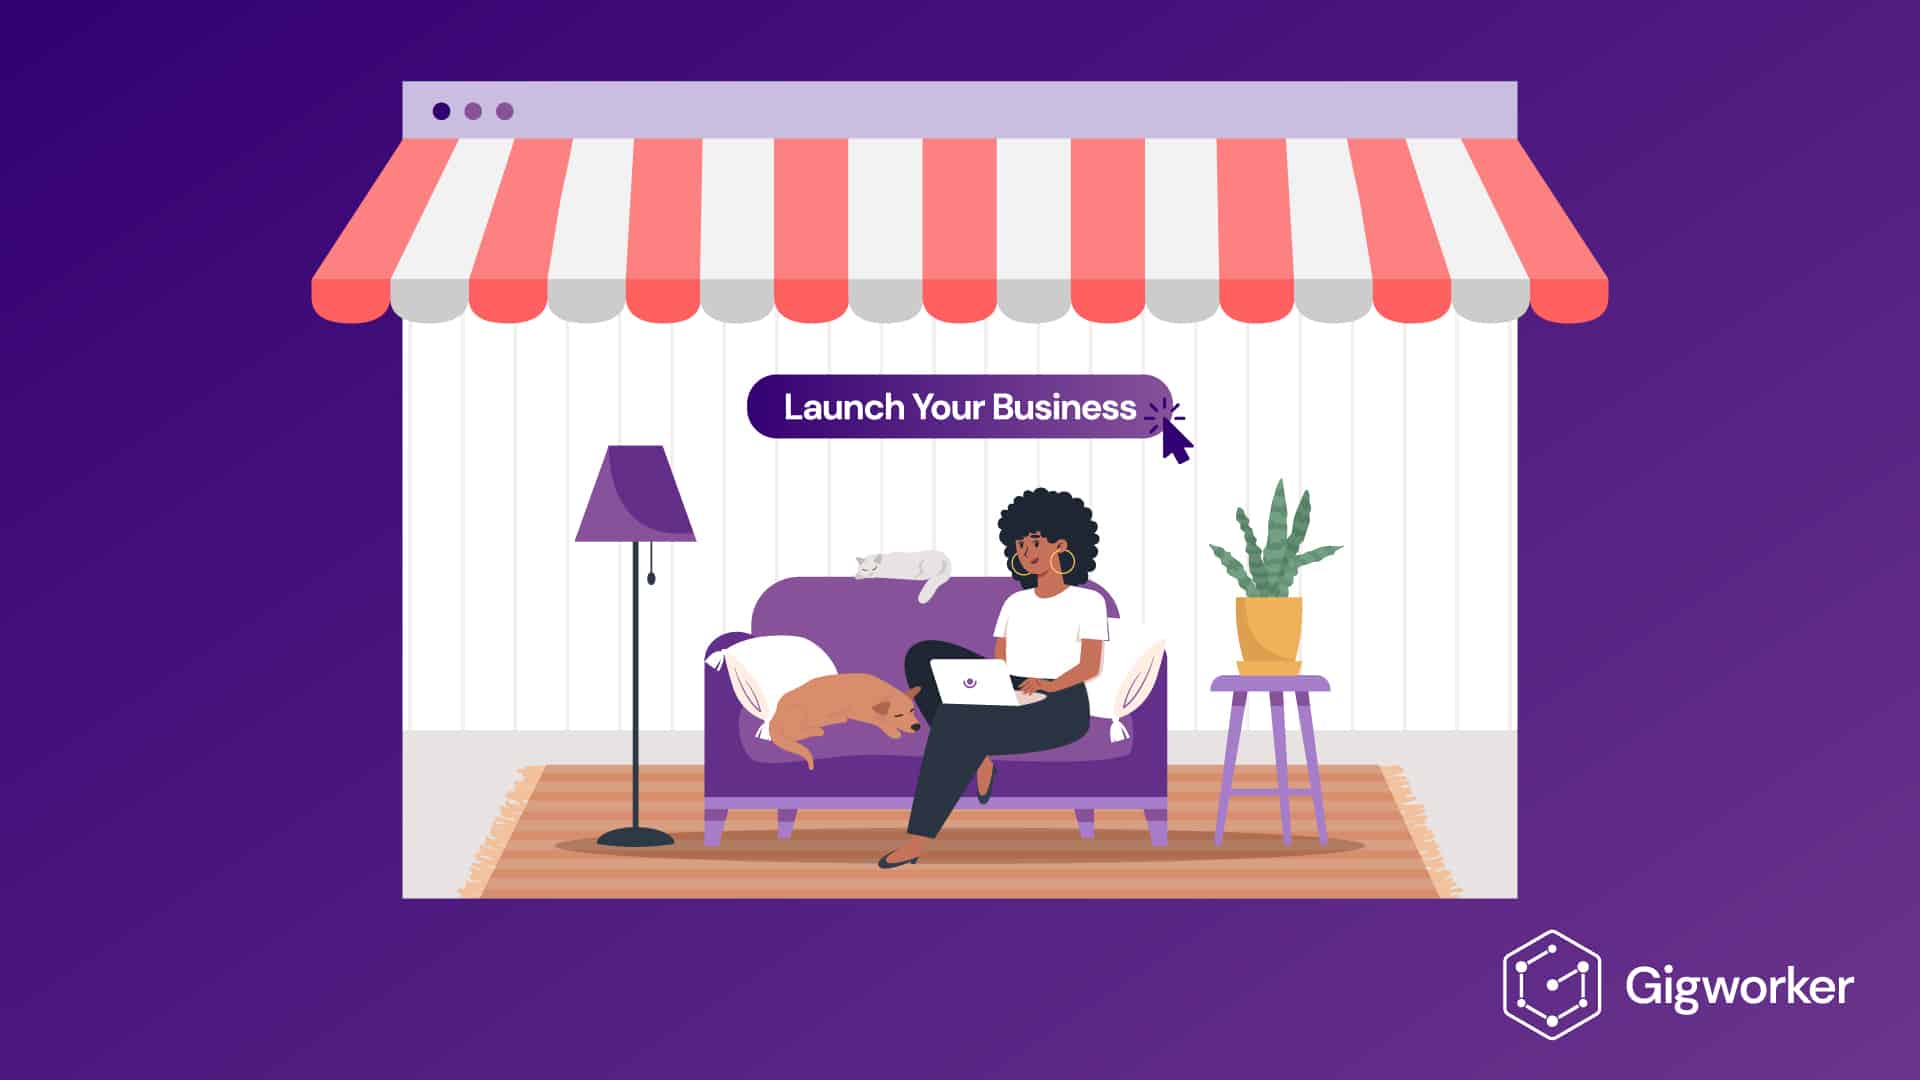 vector graphic showing an illustration of how to start a business from home